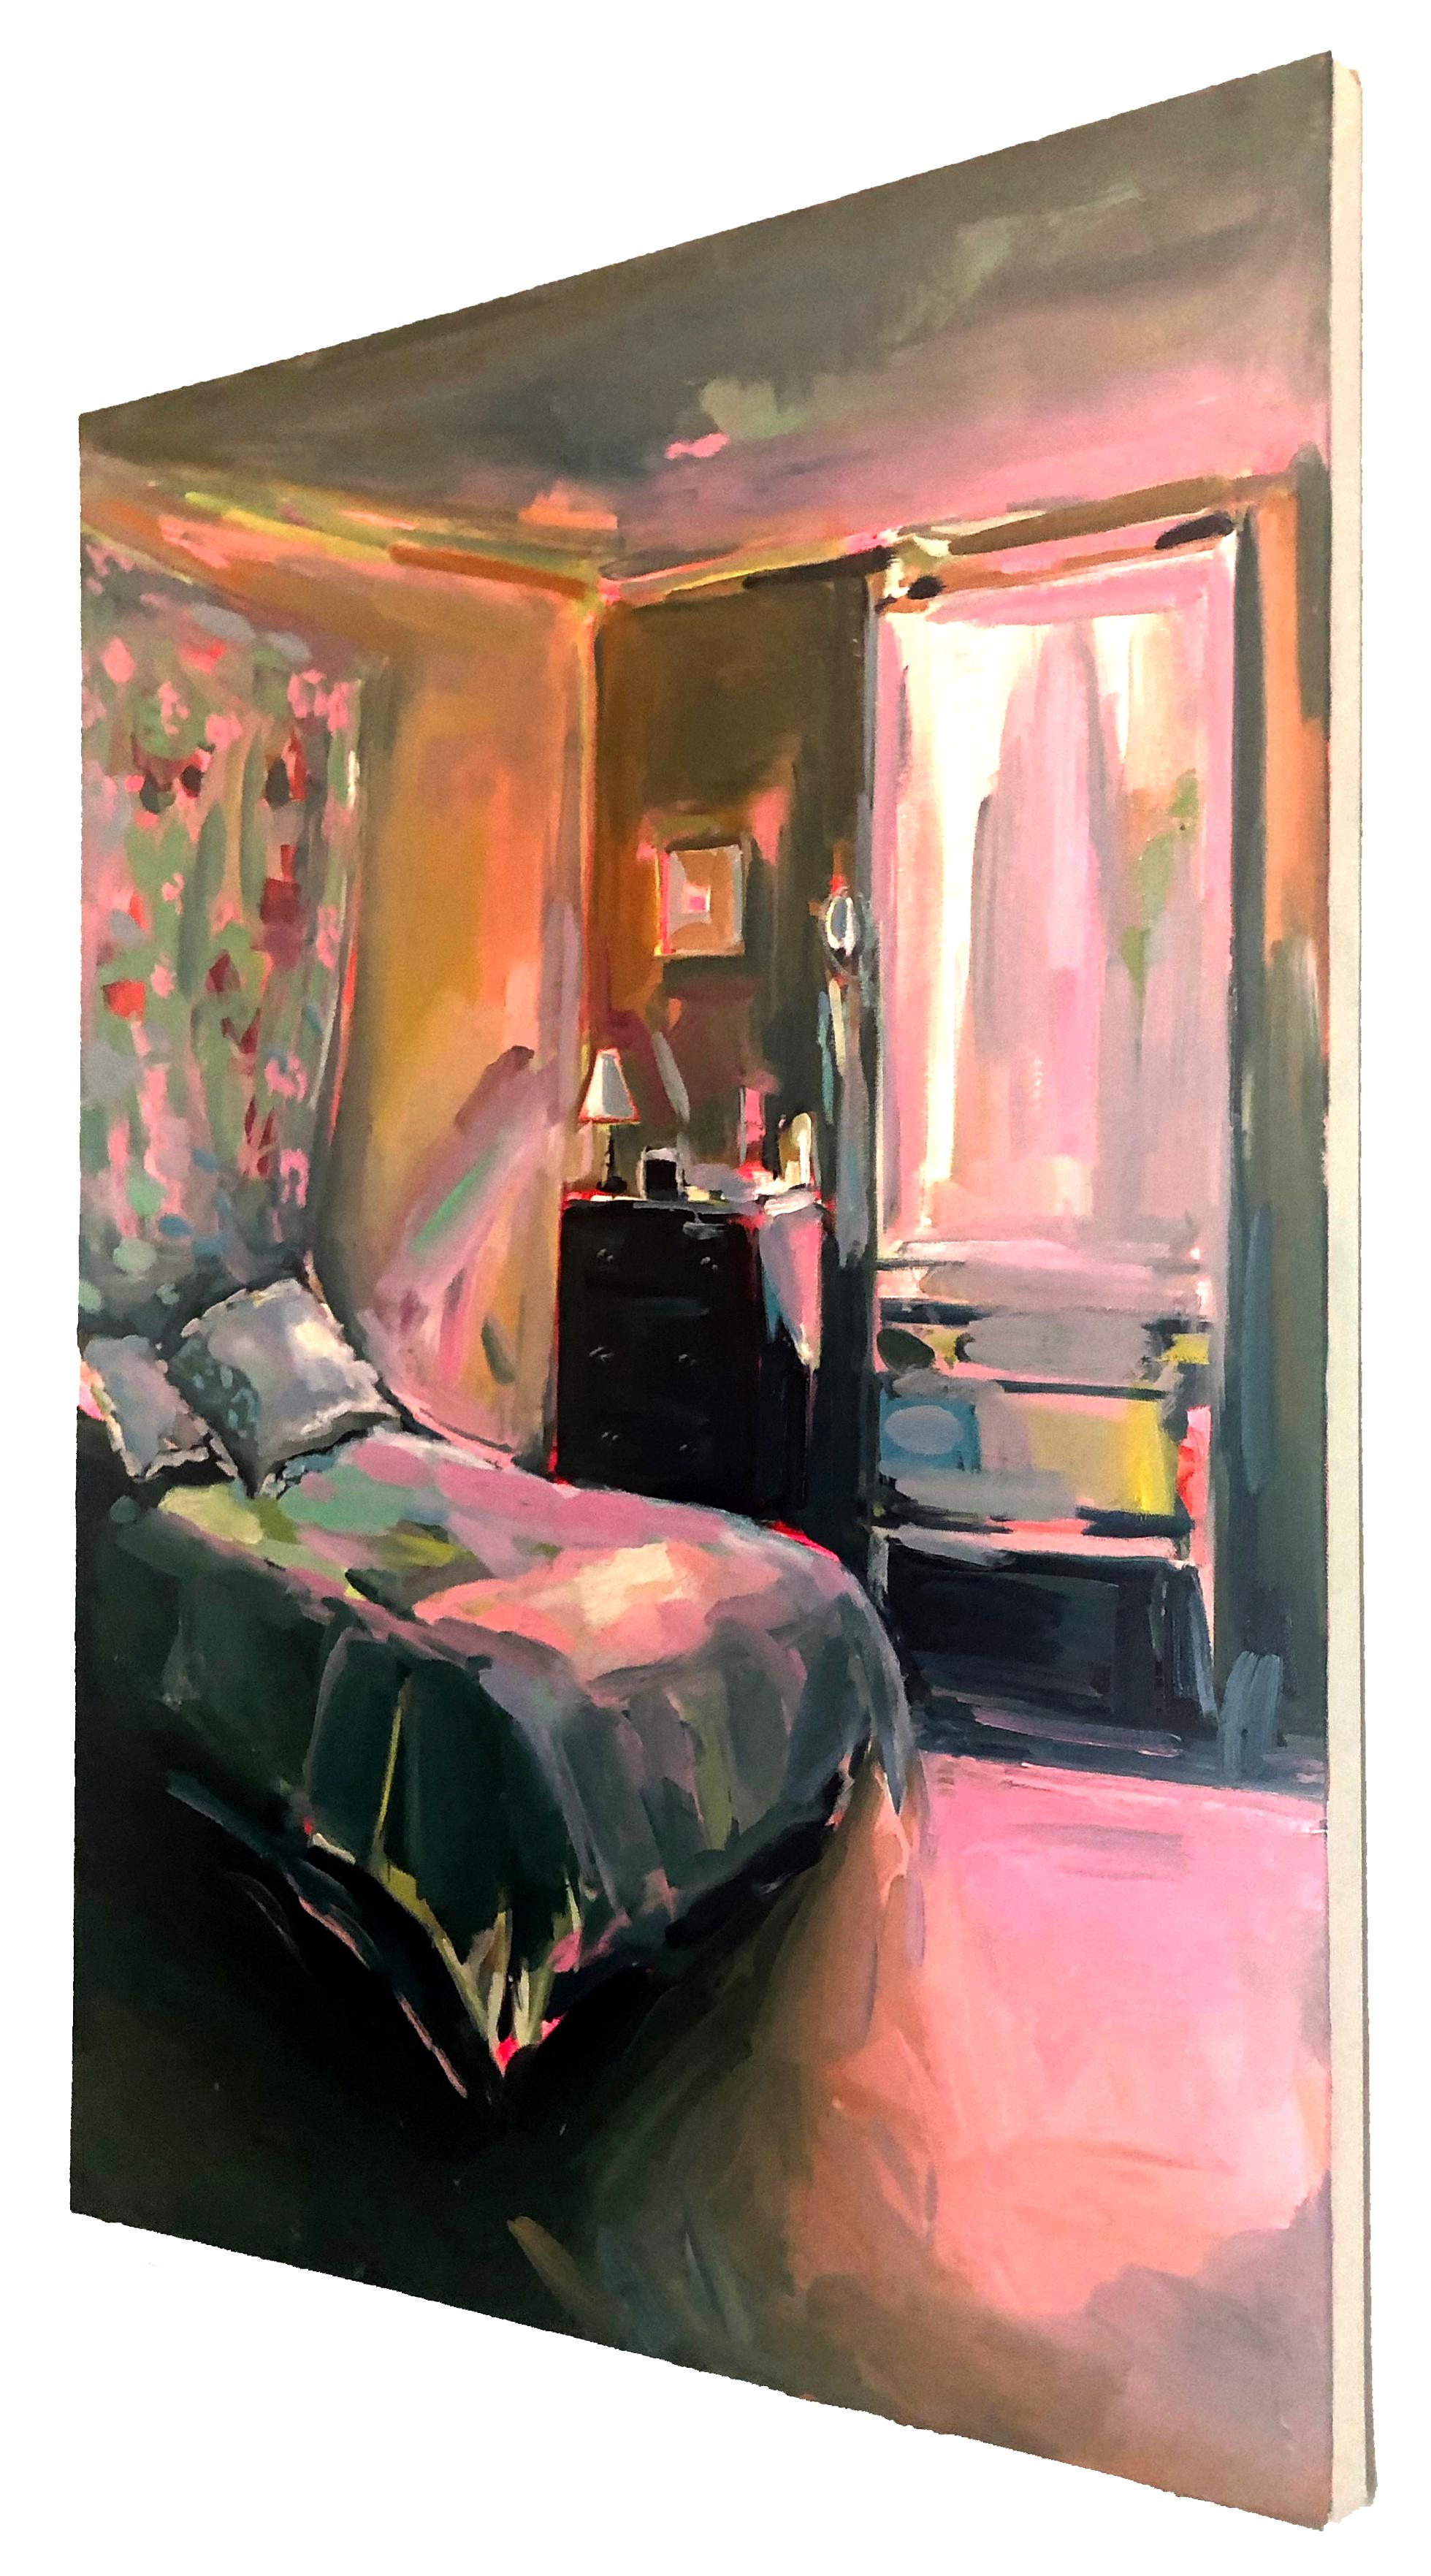 Soft Light, European contemporarystyle interior bedroom painting, Oil on canvas  - Painting by Ekaterina Popova